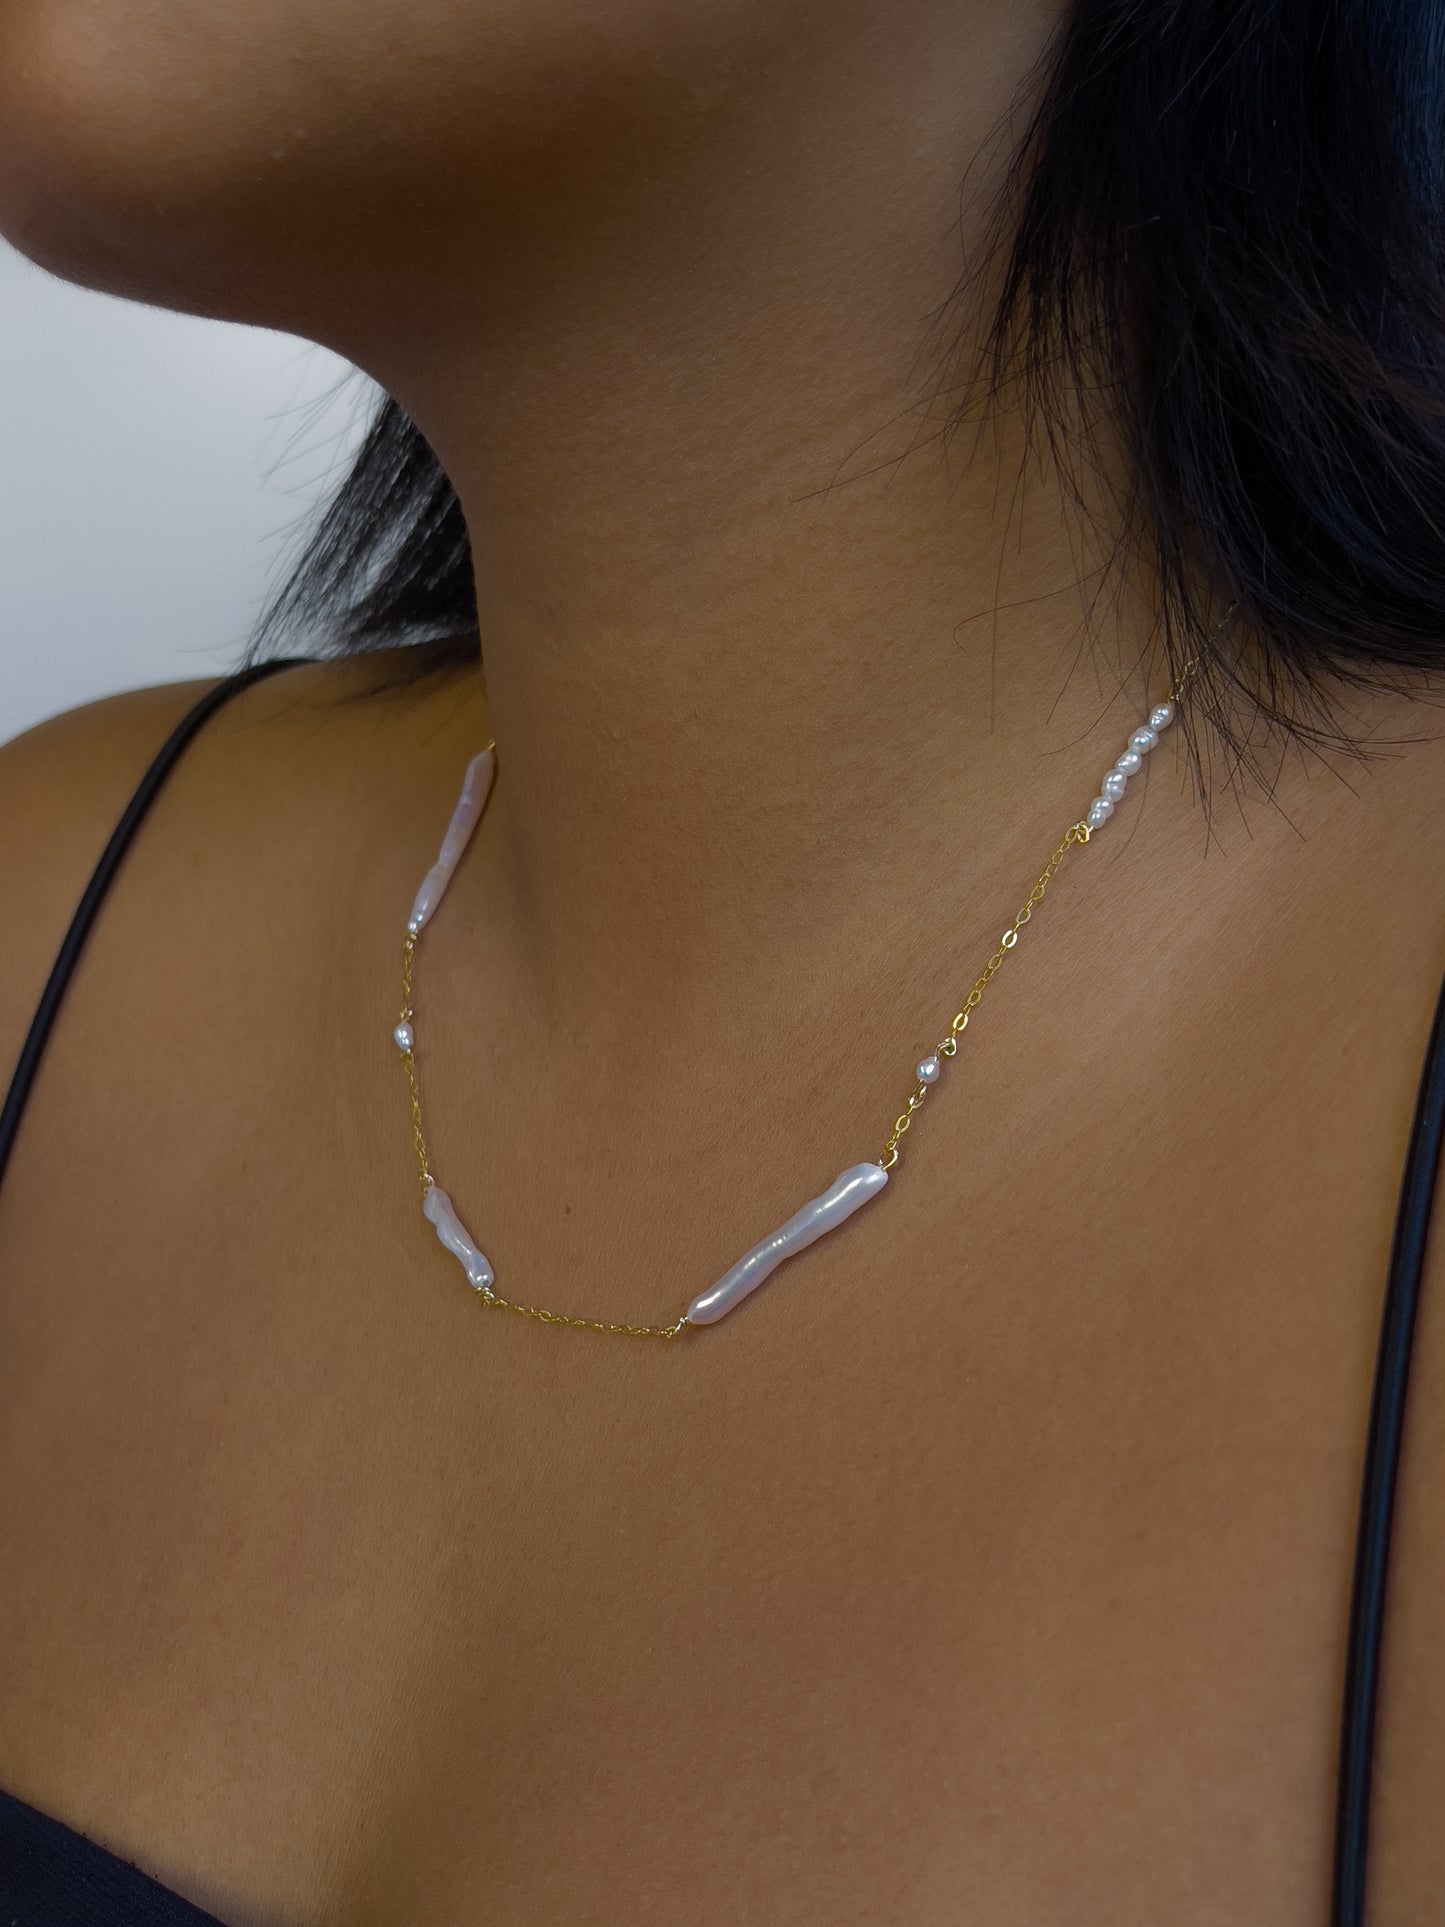 Biwa pearl gold necklace. This ultra fine 14 karat Gold filled with sterling silver flat cable chain suspends gorgeous Biwa elongated freshwater pearls and freshwater seed pearls. Designed and made by nāmaka.